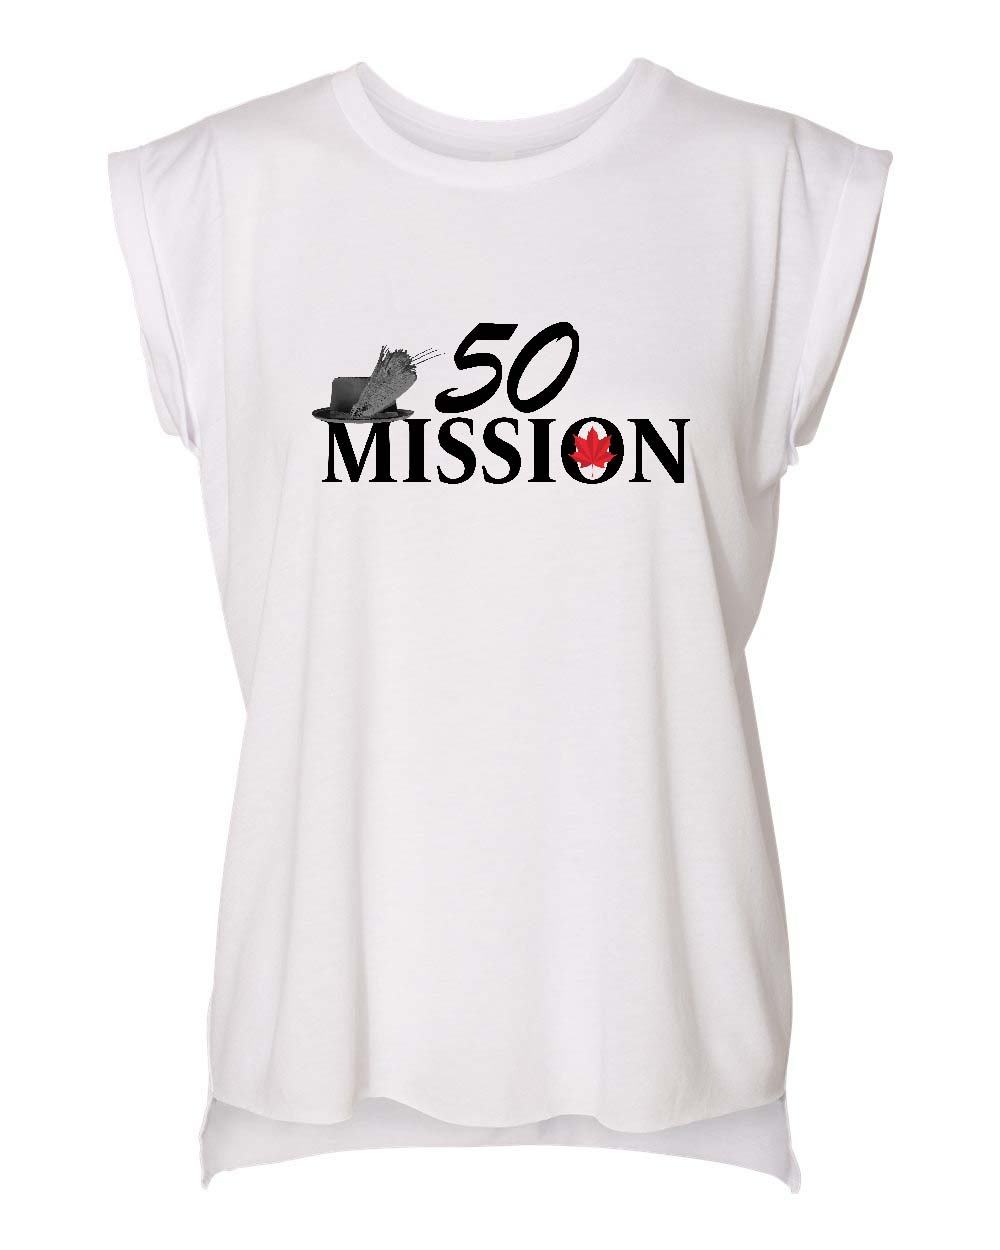 50 Mission band logo Women’s Flowy Rolled Cuffs Muscle Tee